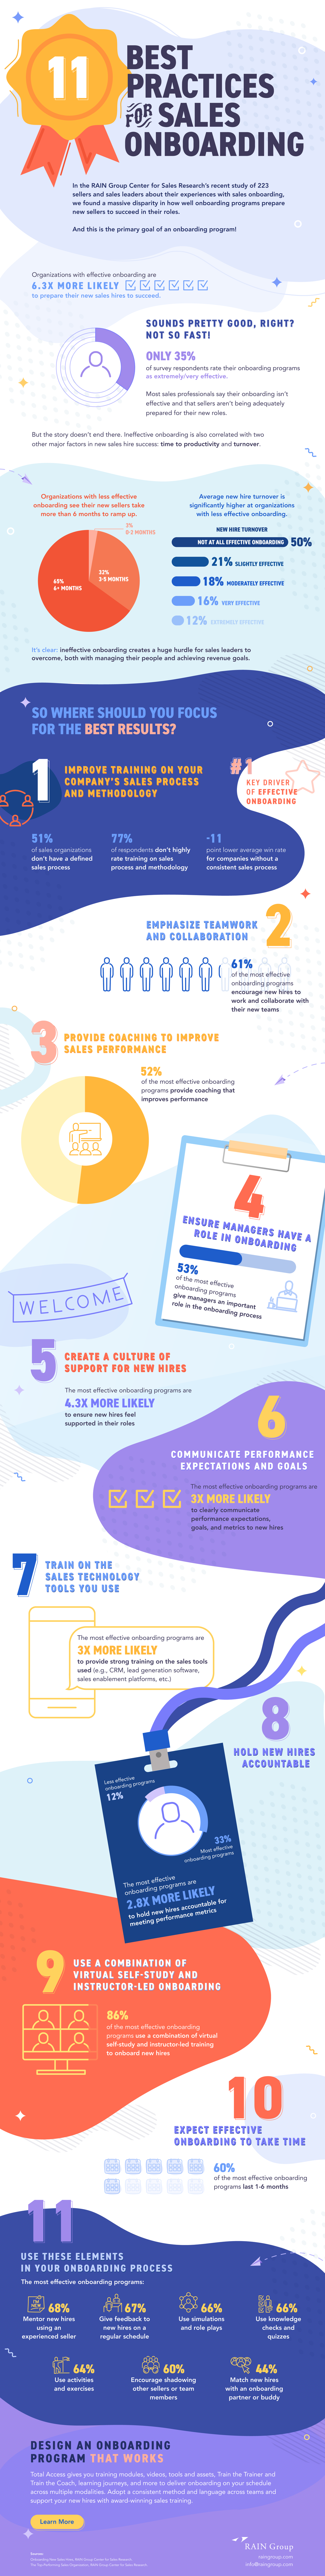 11 Best Practices for Sales Onboarding Infographic